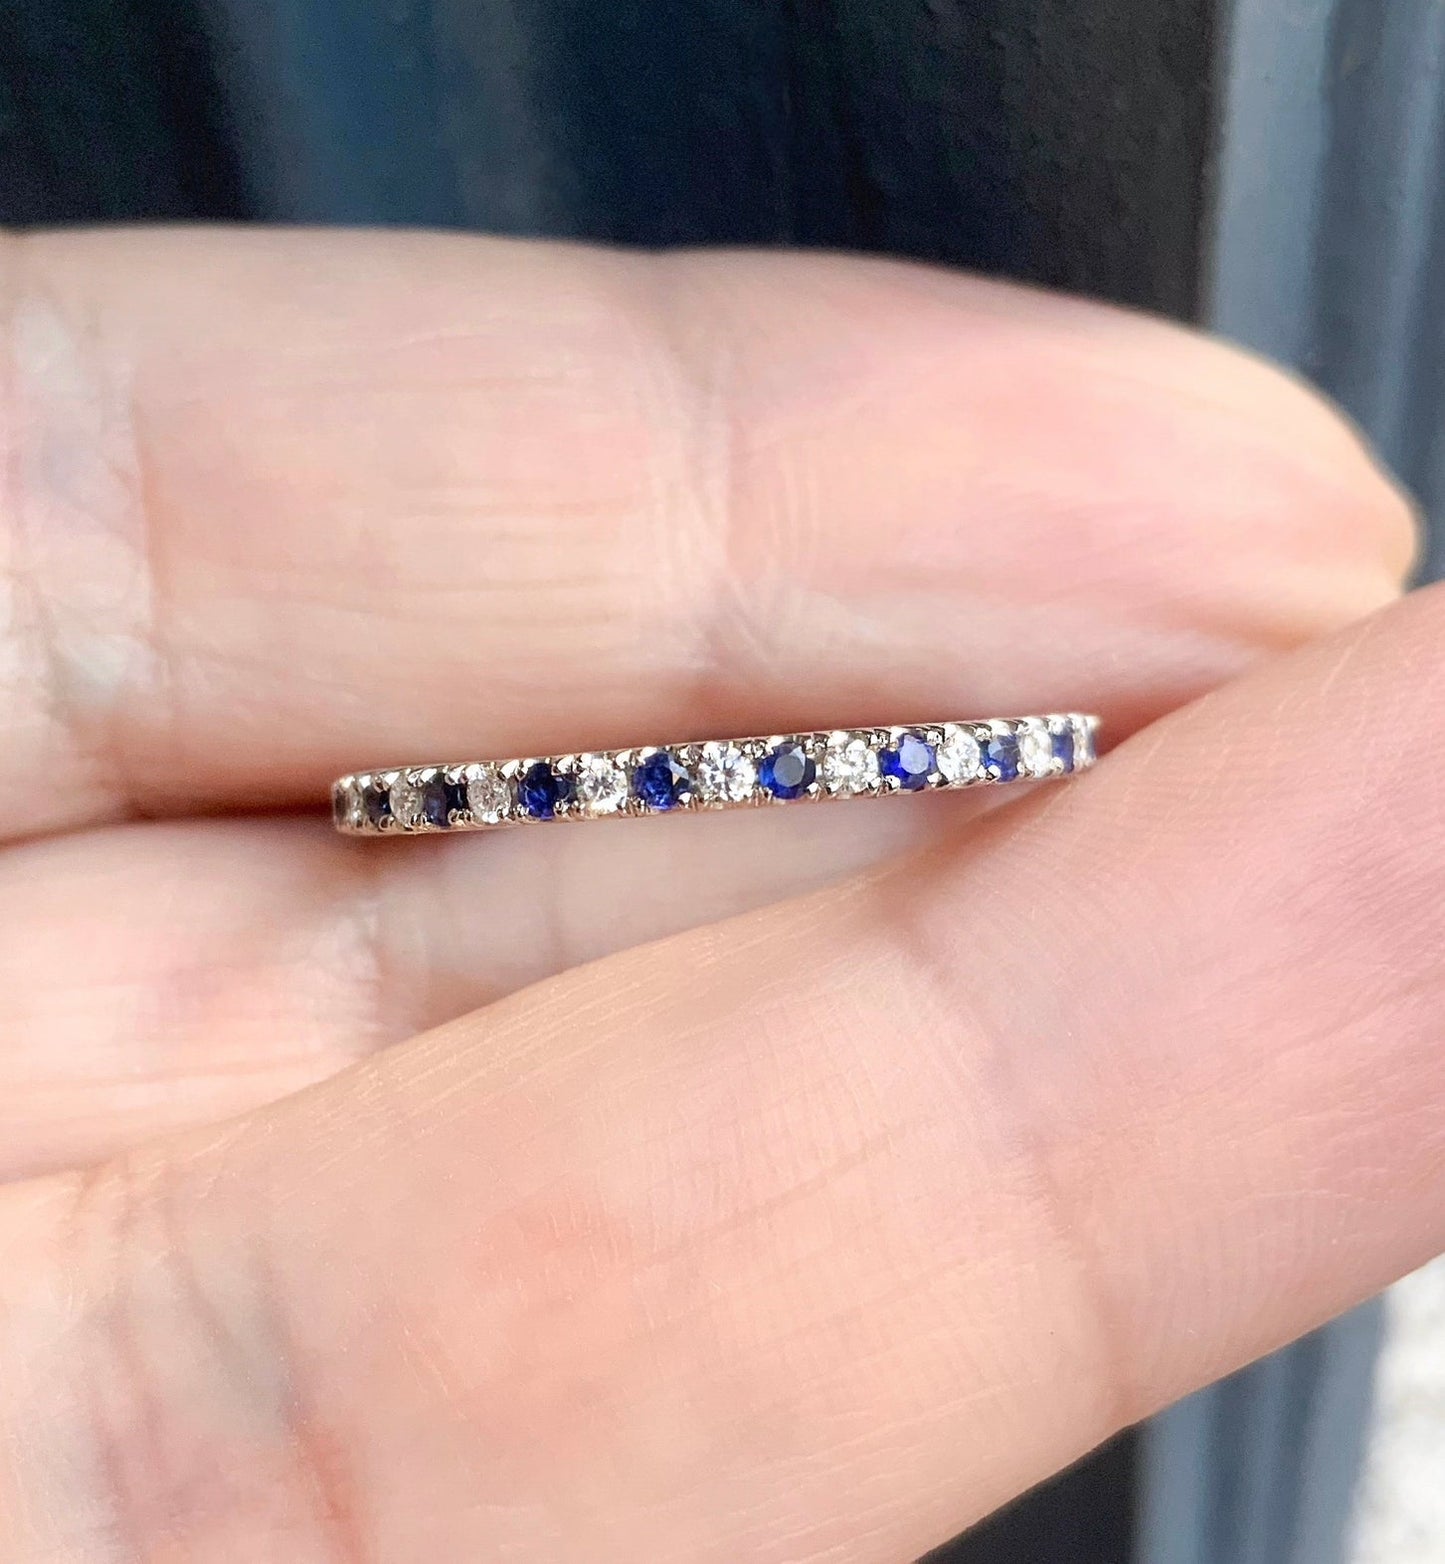 Reserved for Lisa/ 1.5mm Half Eternity Pave Band with Natural Diamonds and Two Shades of Blue Sapphires